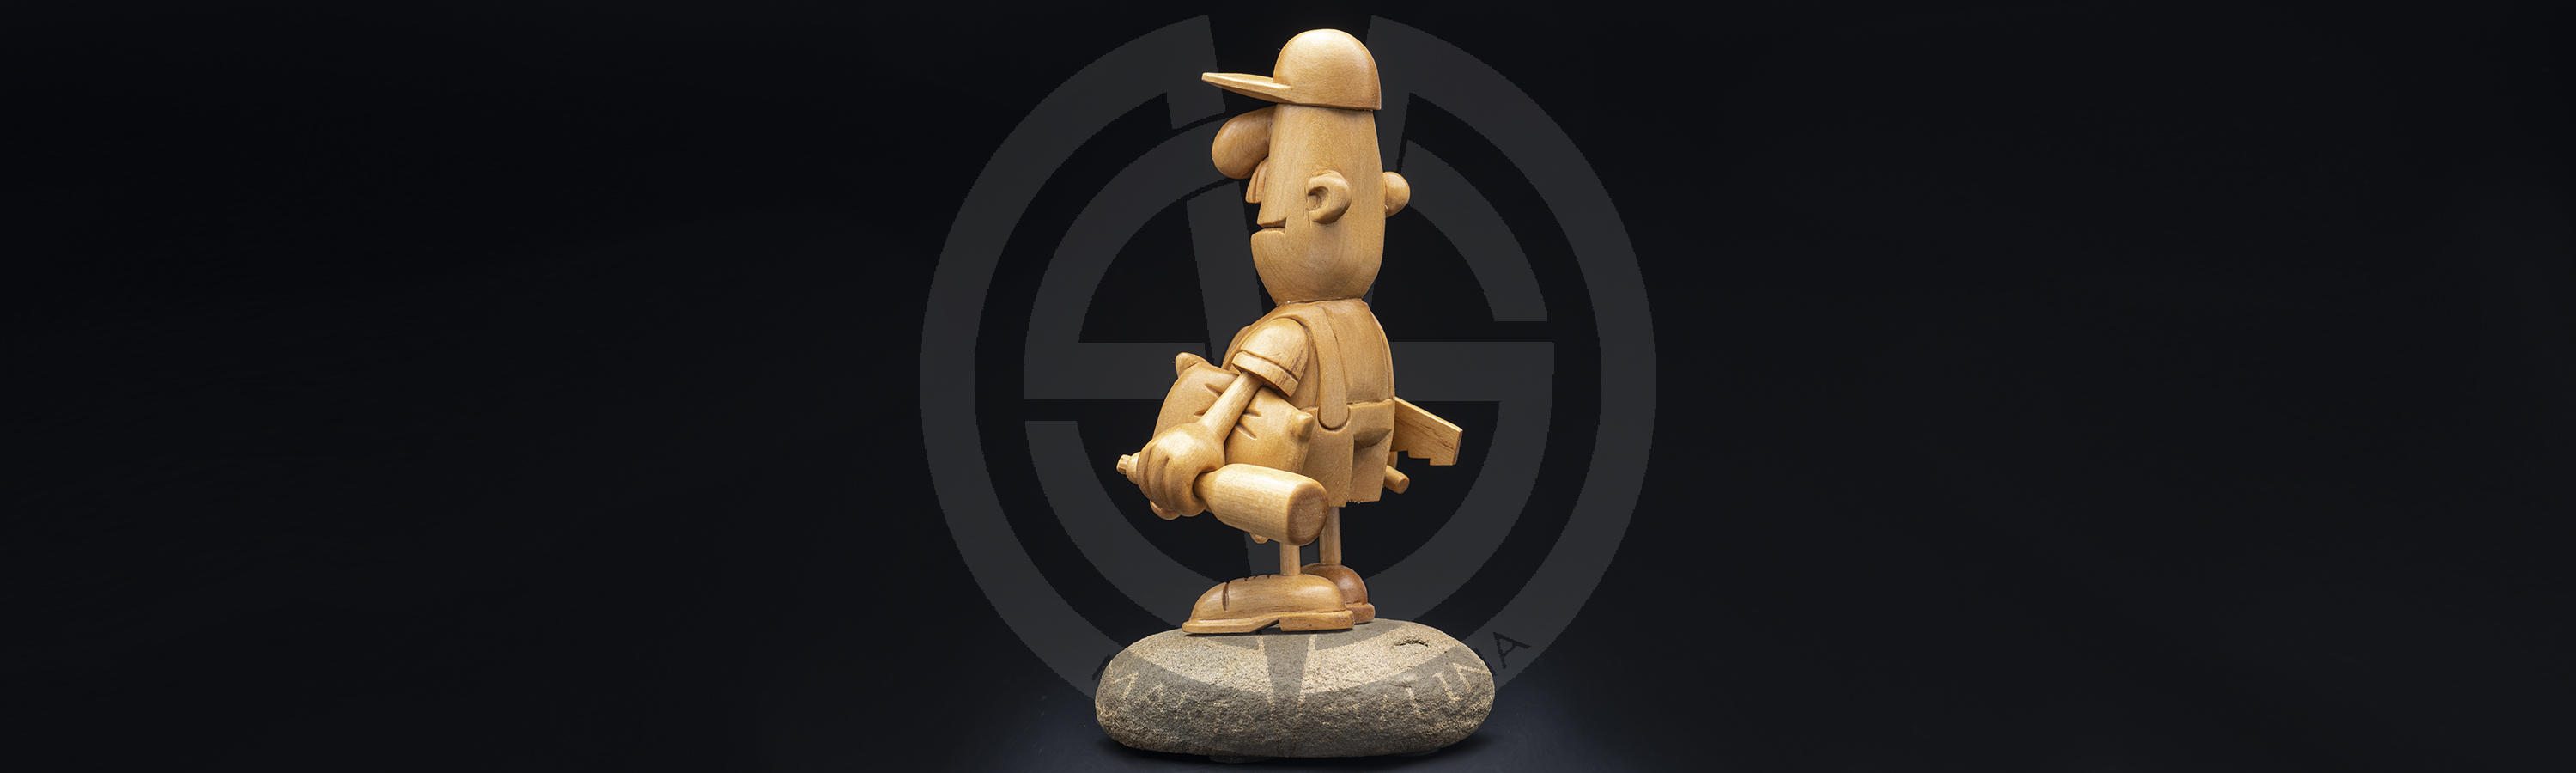 Humorous wooden plastic The Master